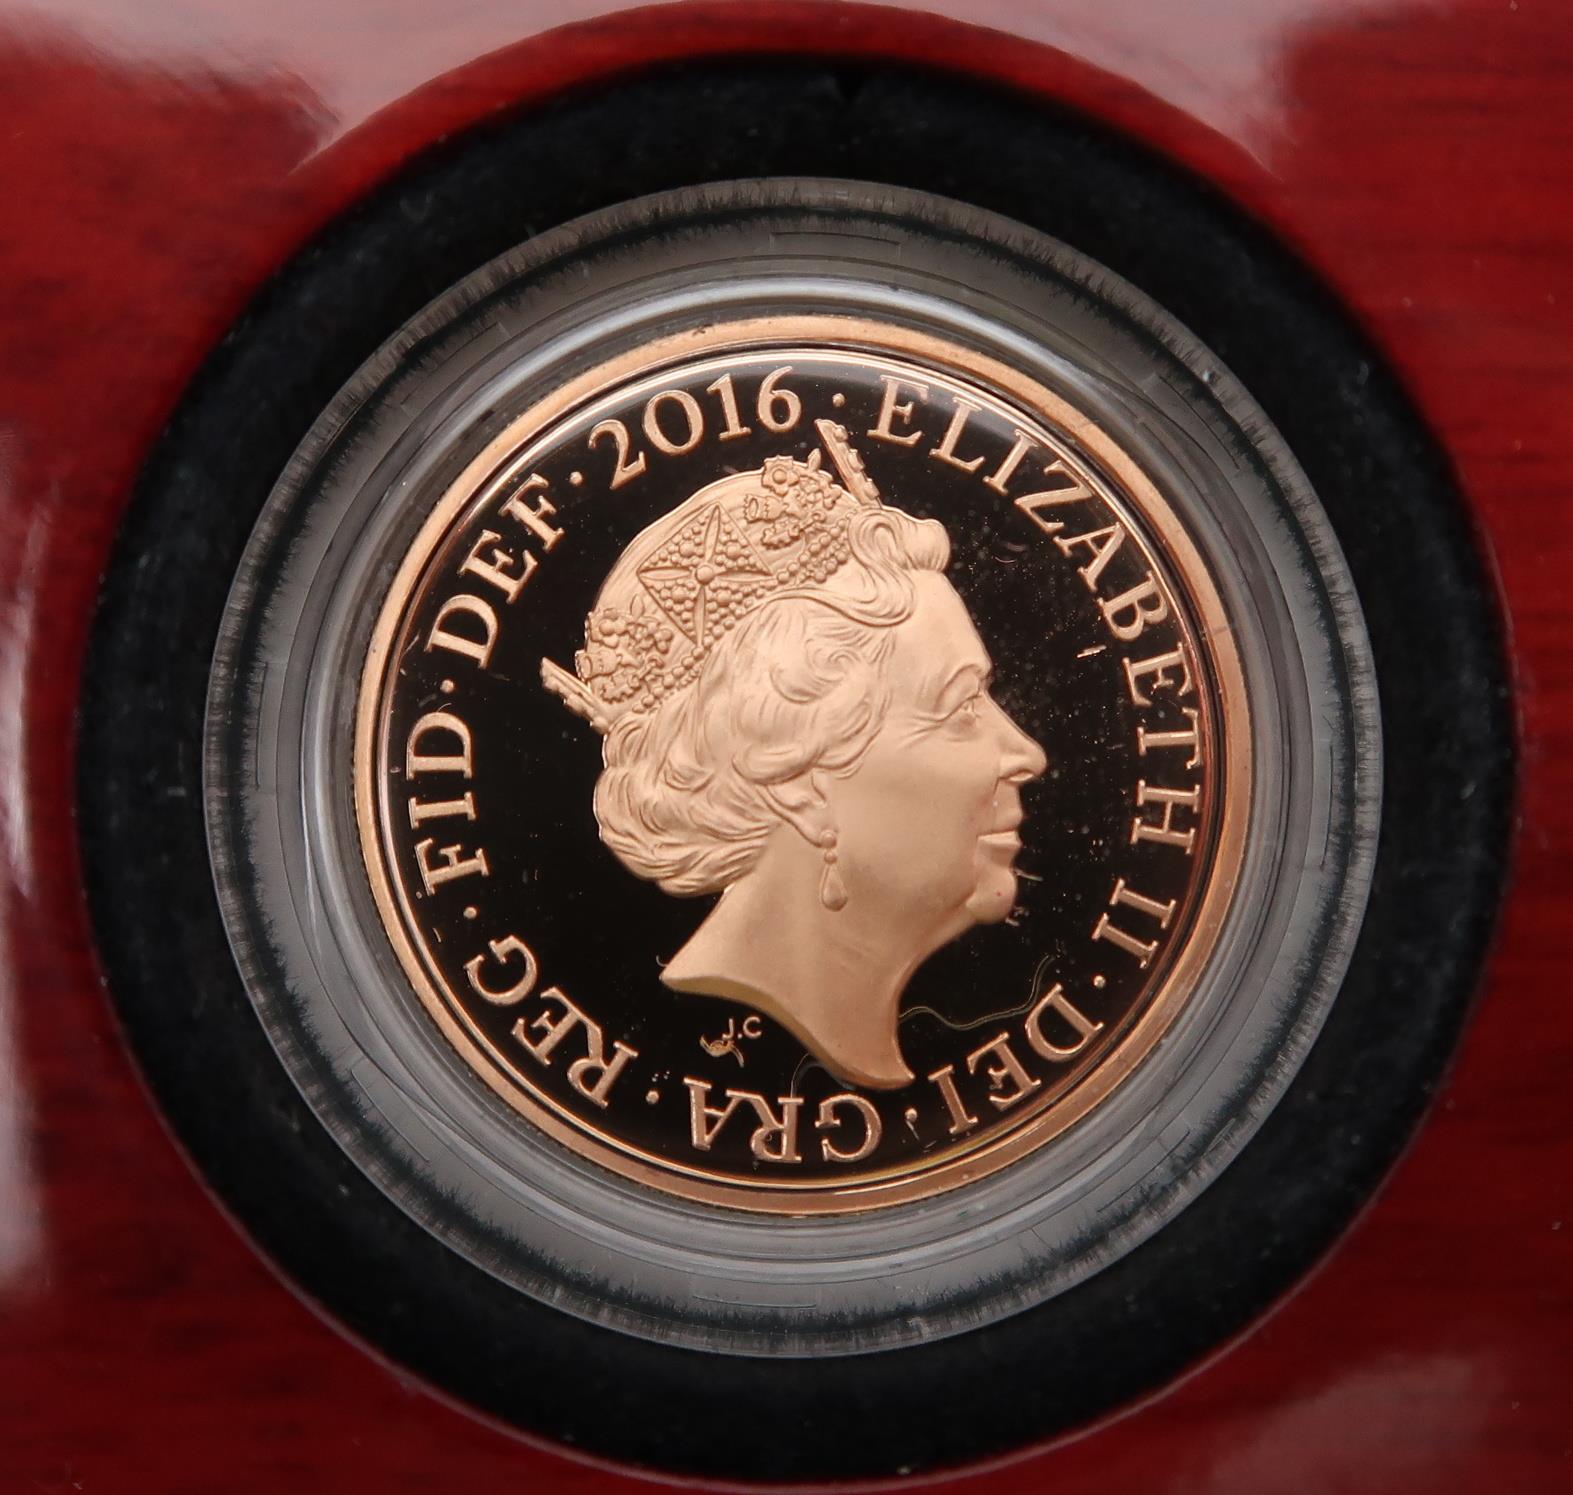 ELIZABETH II Last Round Pound; Royal Mint Gold Proof 2016 Obverse fifth crowned portrait of HM Queen - Image 2 of 5